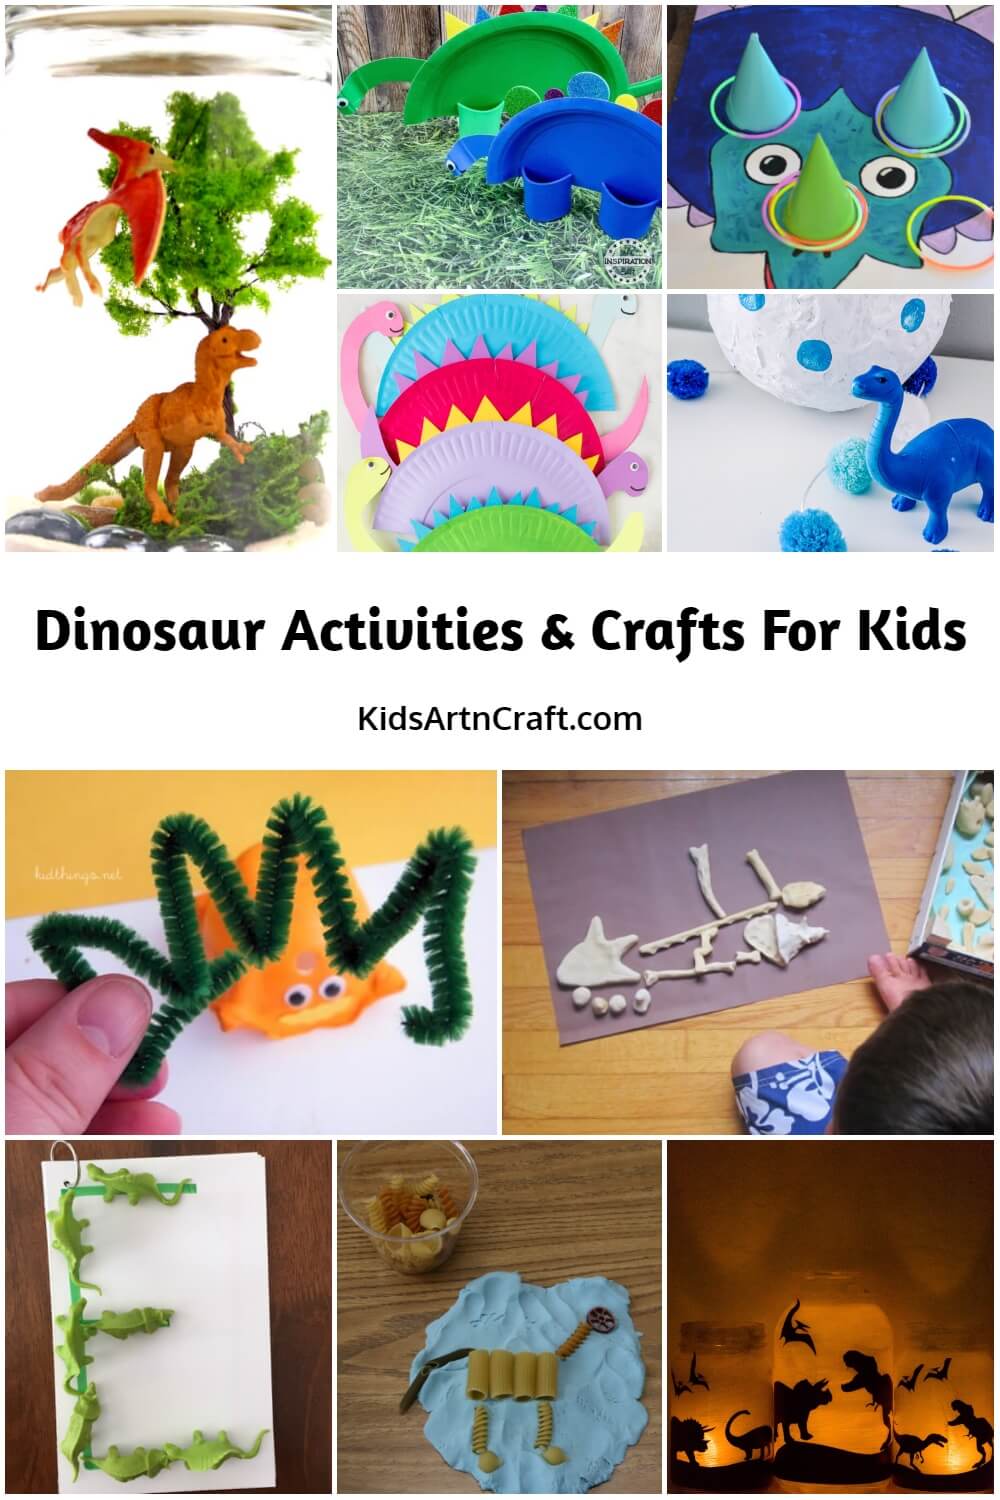 Dinosaur Activities and Crafts For Kids